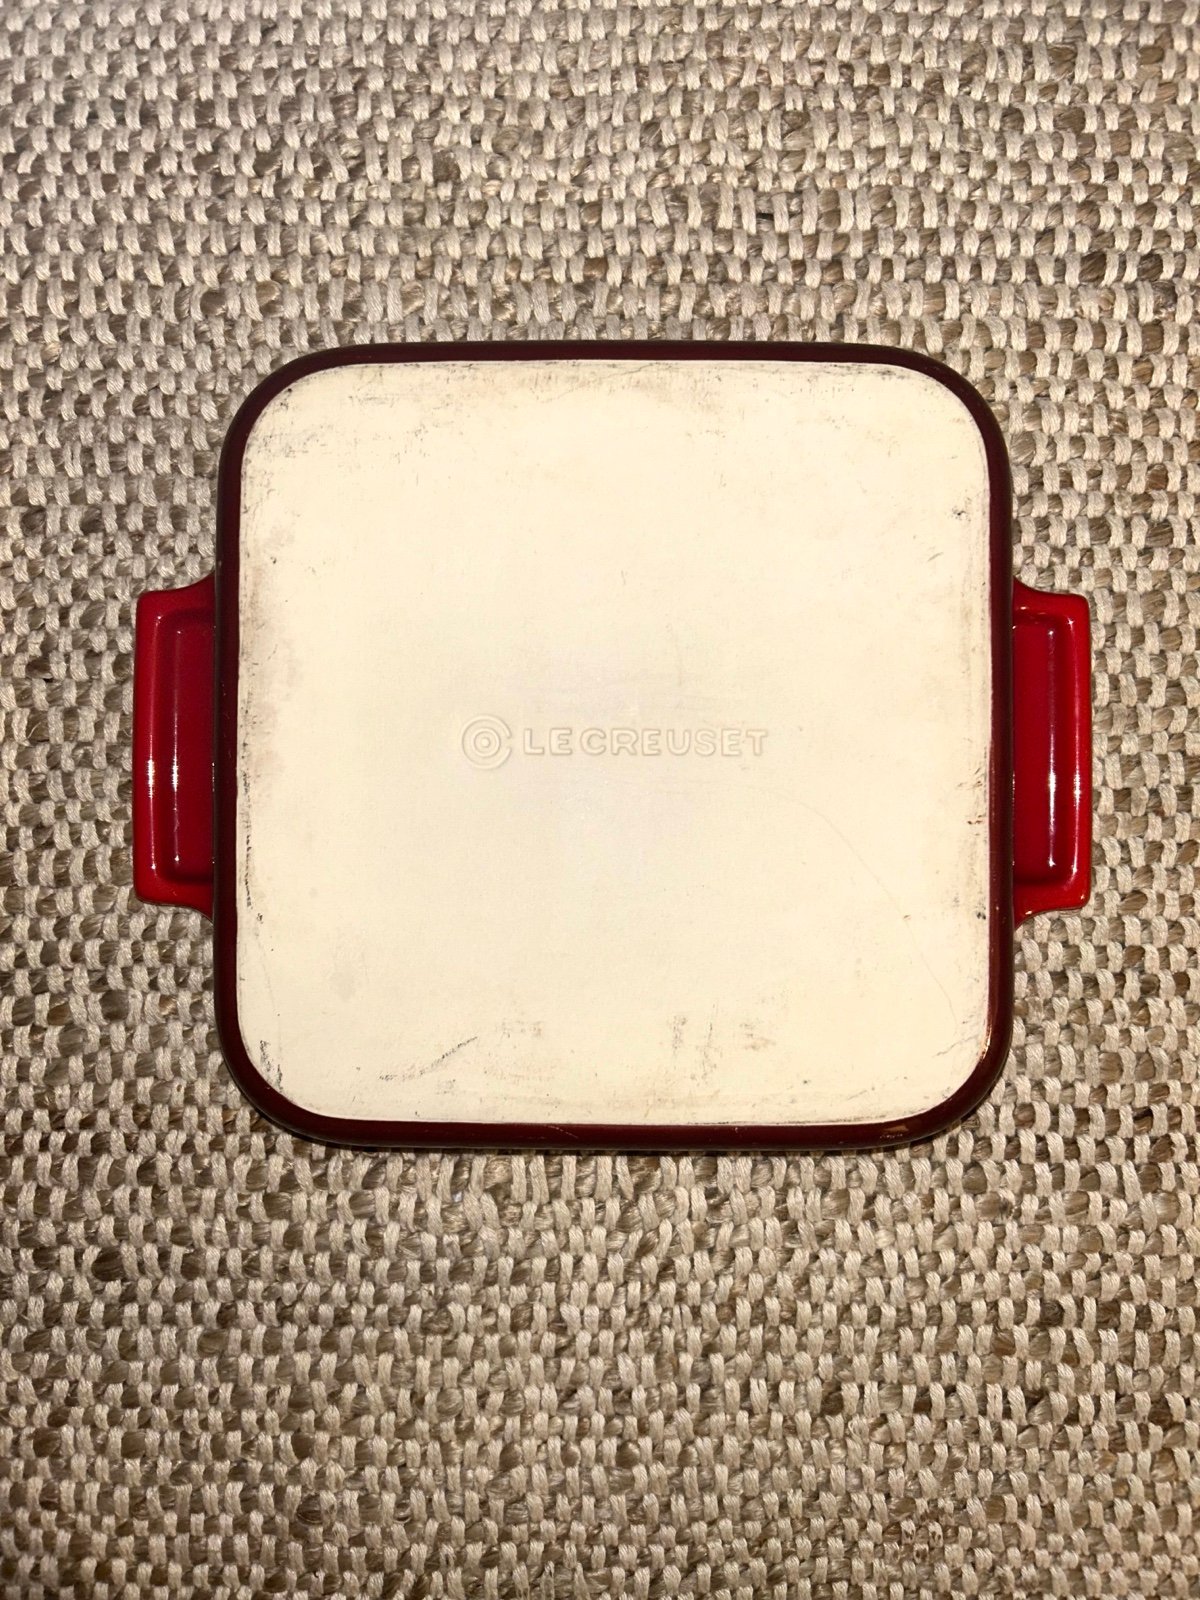 Red Le Creuset Stoneware Square Baking Dish with Handles 9”x 9” 3RWpdStEW